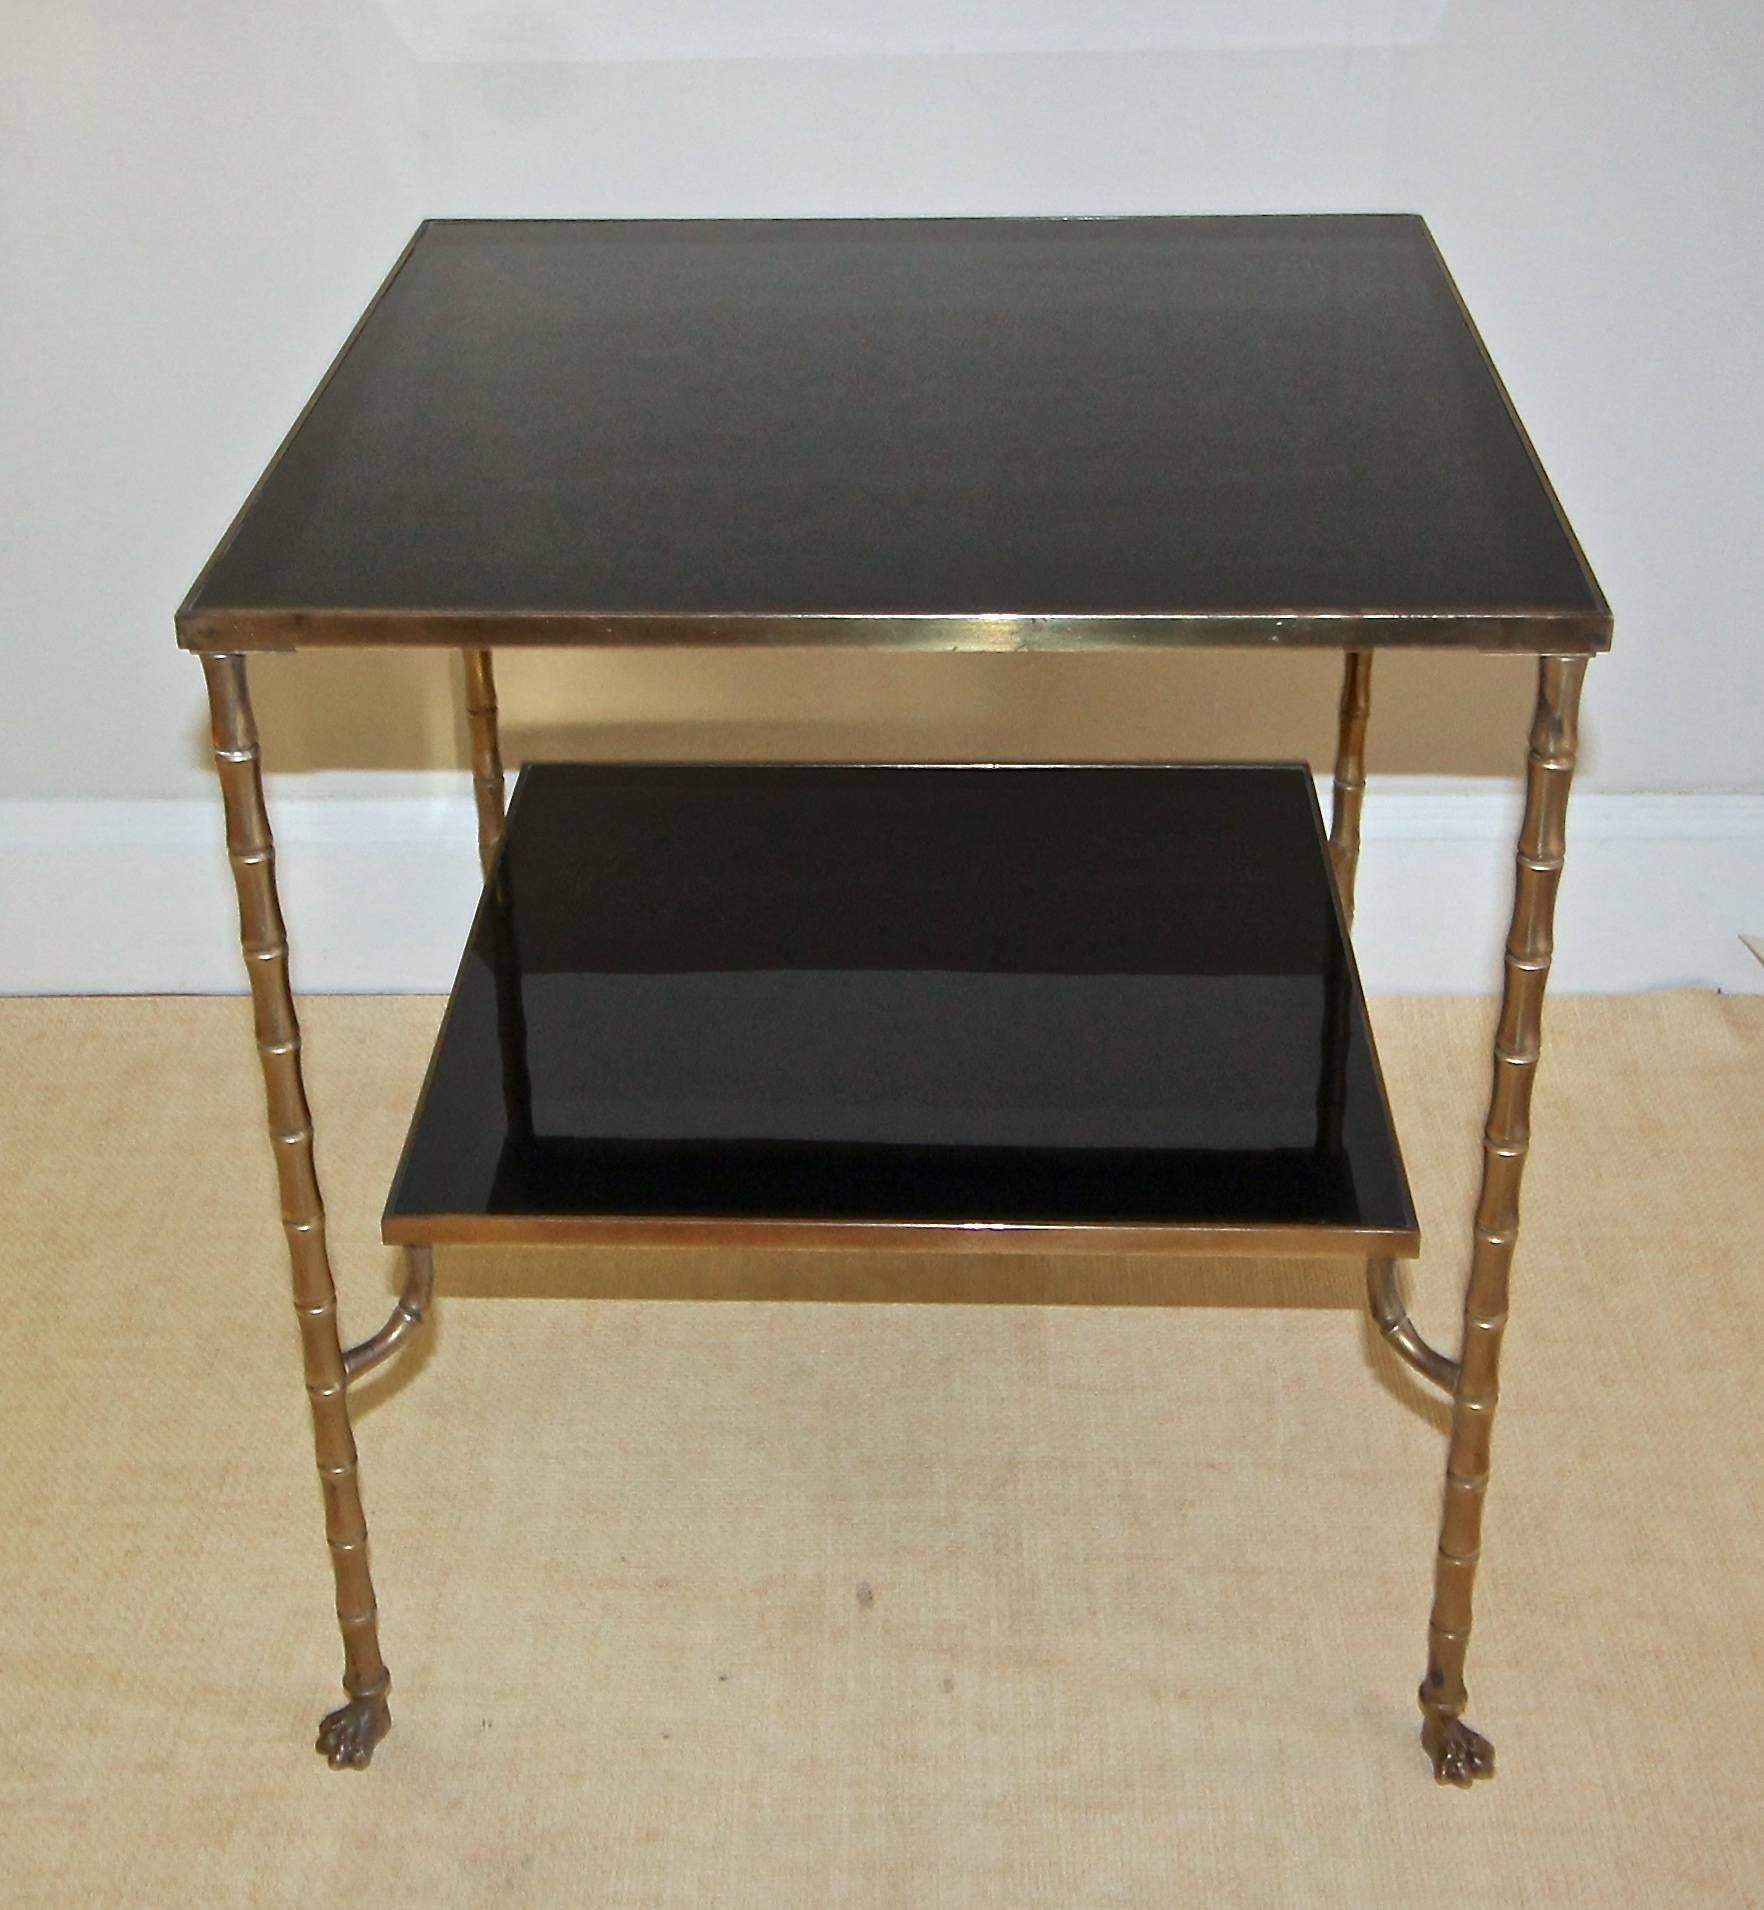 Single French Maison Baguès bronze two-tier side or end table with detailed paw feet. Warm patina with superb crafted detailing. Original black glass inset tops.